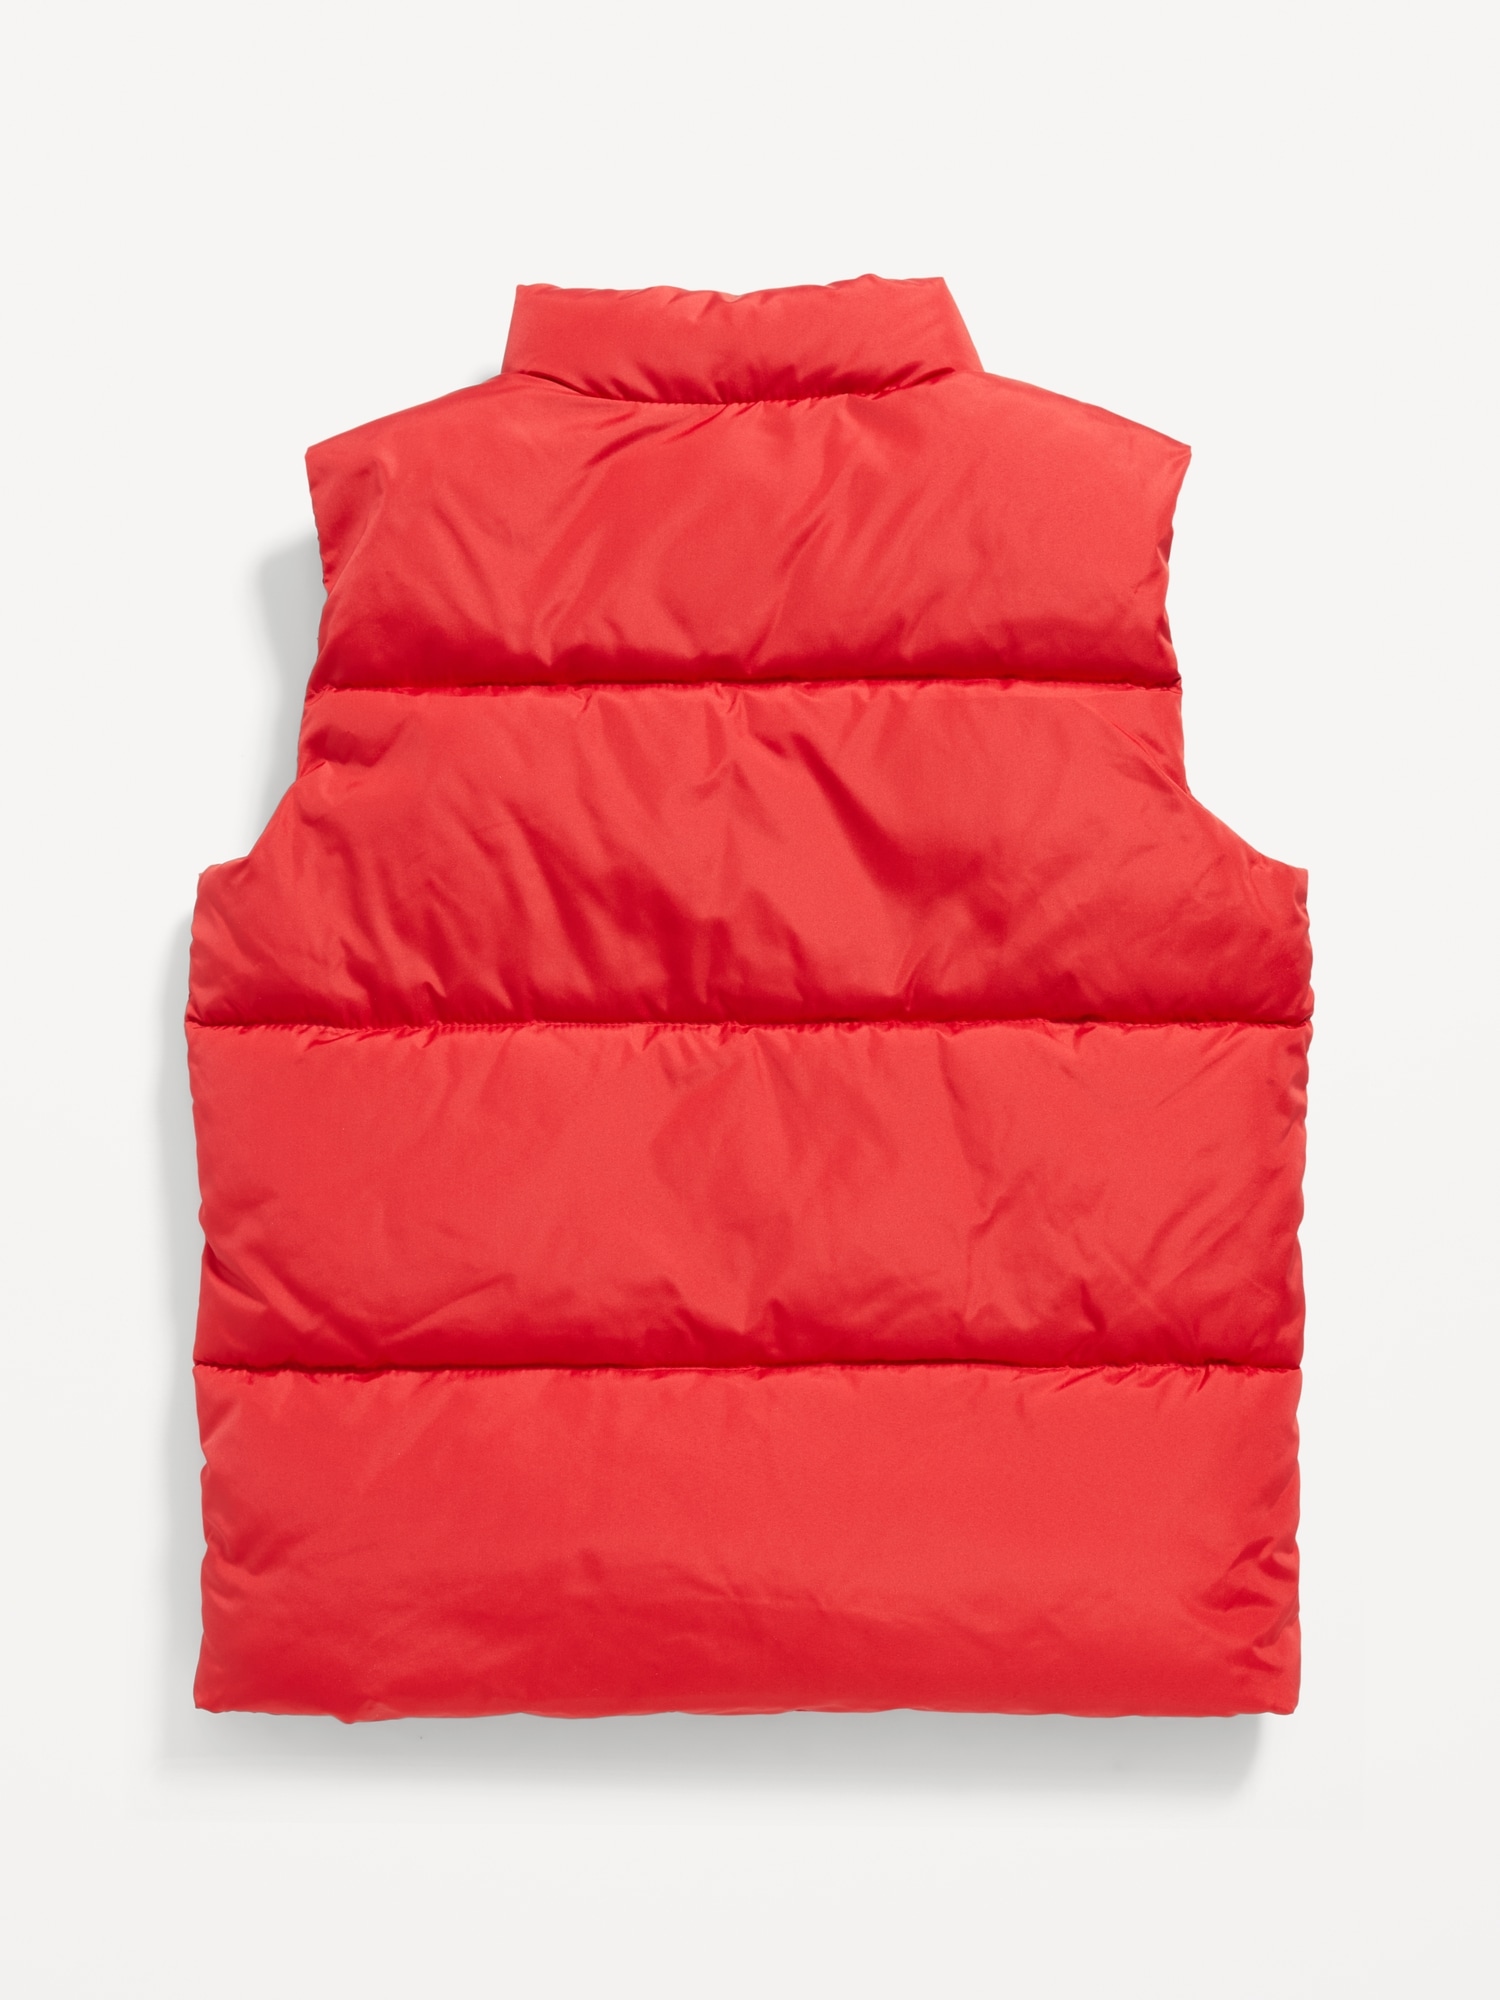 Gender-Neutral Water-Resistant Frost-Free Puffer Vest for Kids | Old Navy